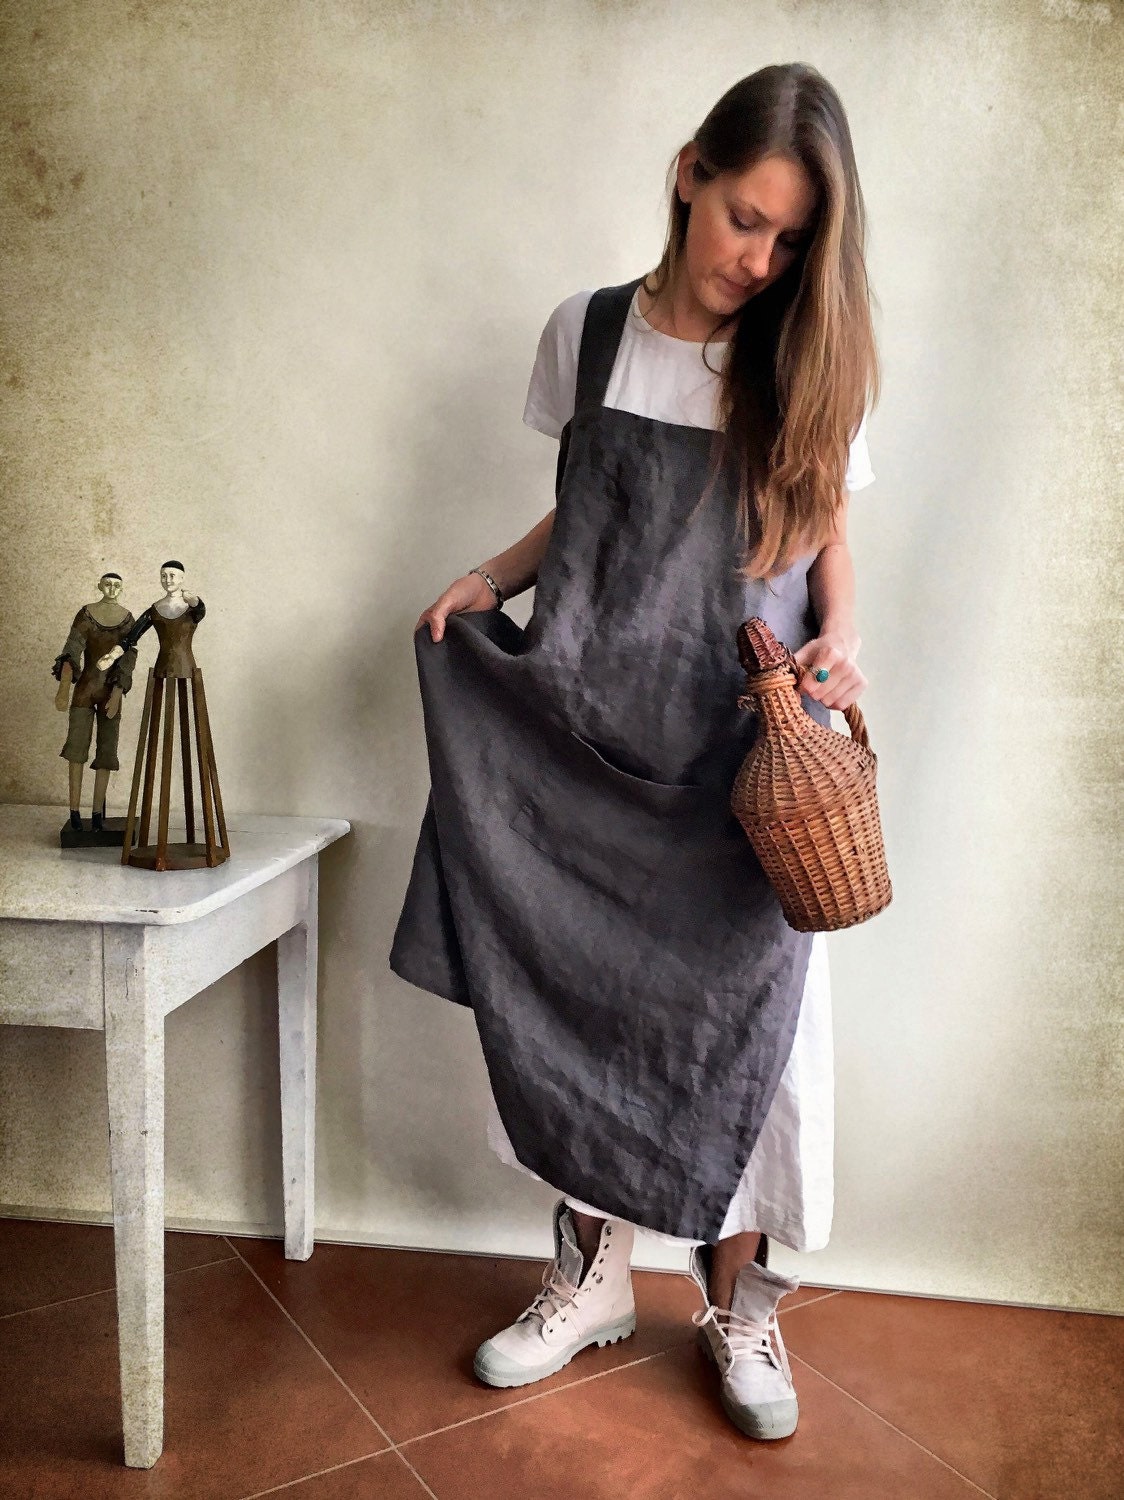 Where can you find pinafore apron patterns?